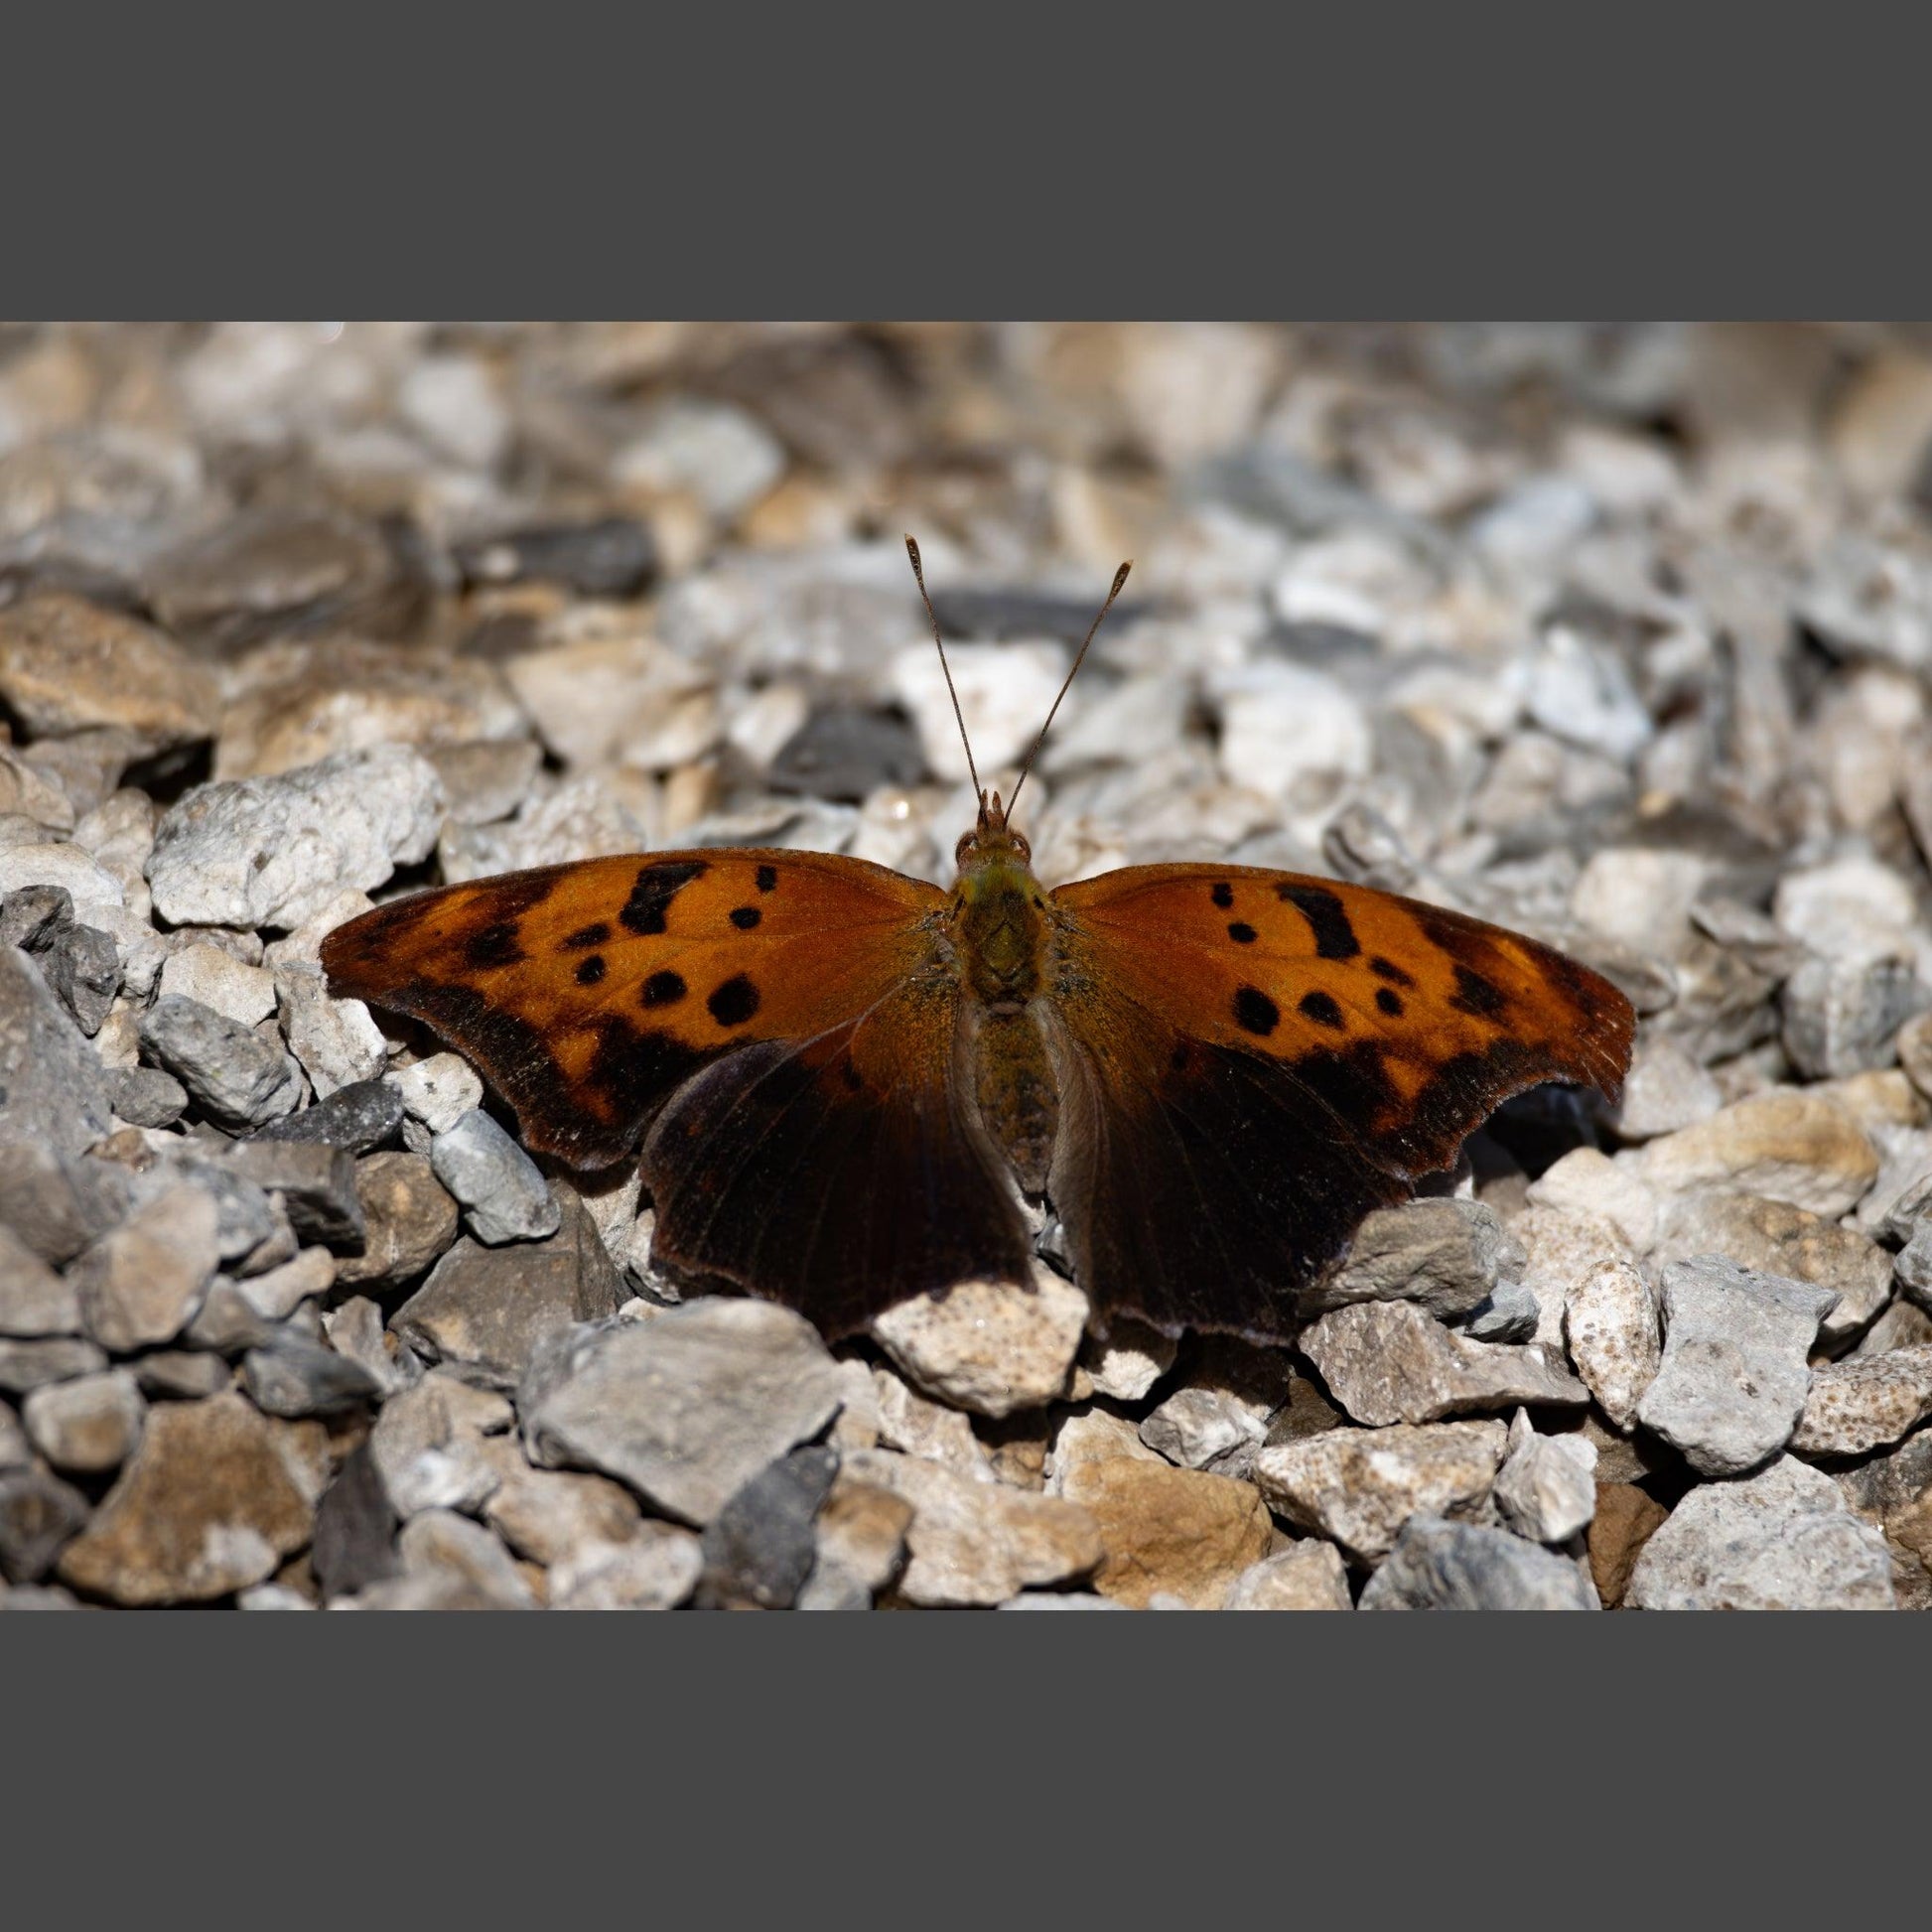 A photo of a Question Mark Butterfly resting on gravel